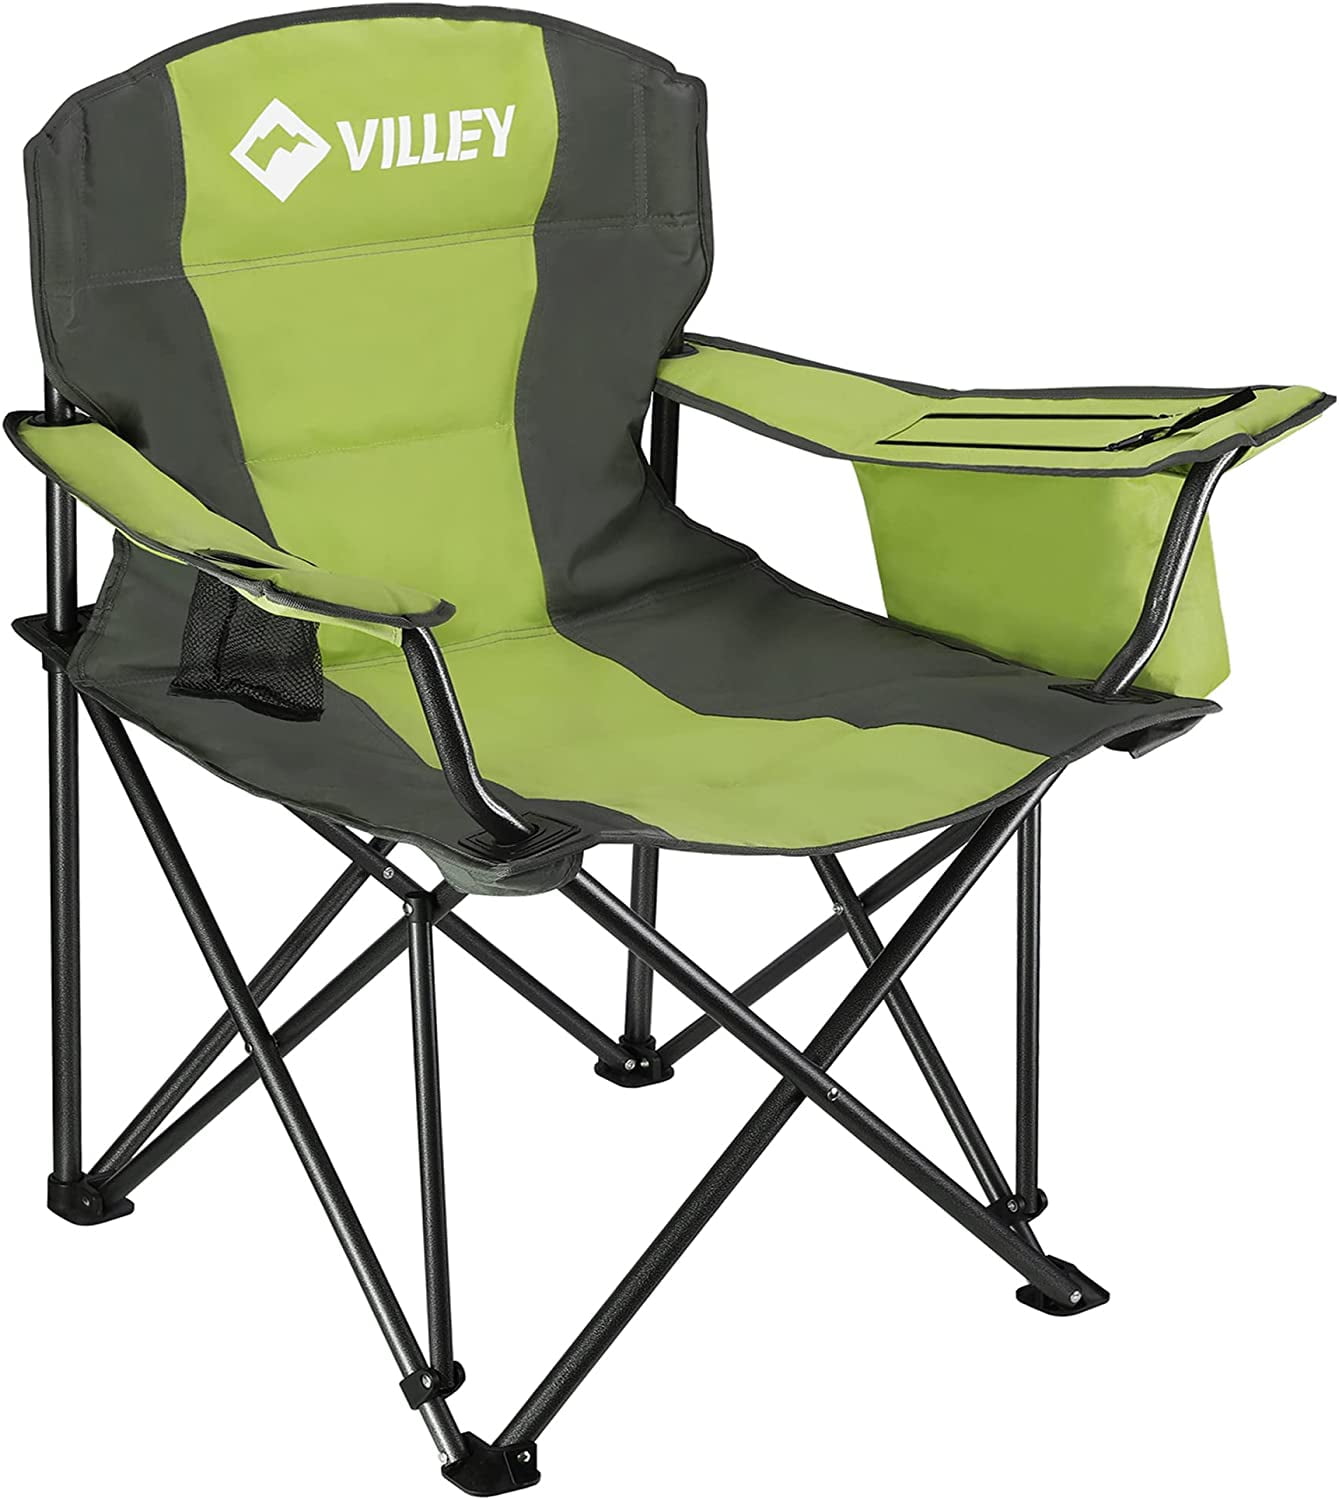 VILLEY Oversized Camping Chair, Heavy Duty Support 450 lbs